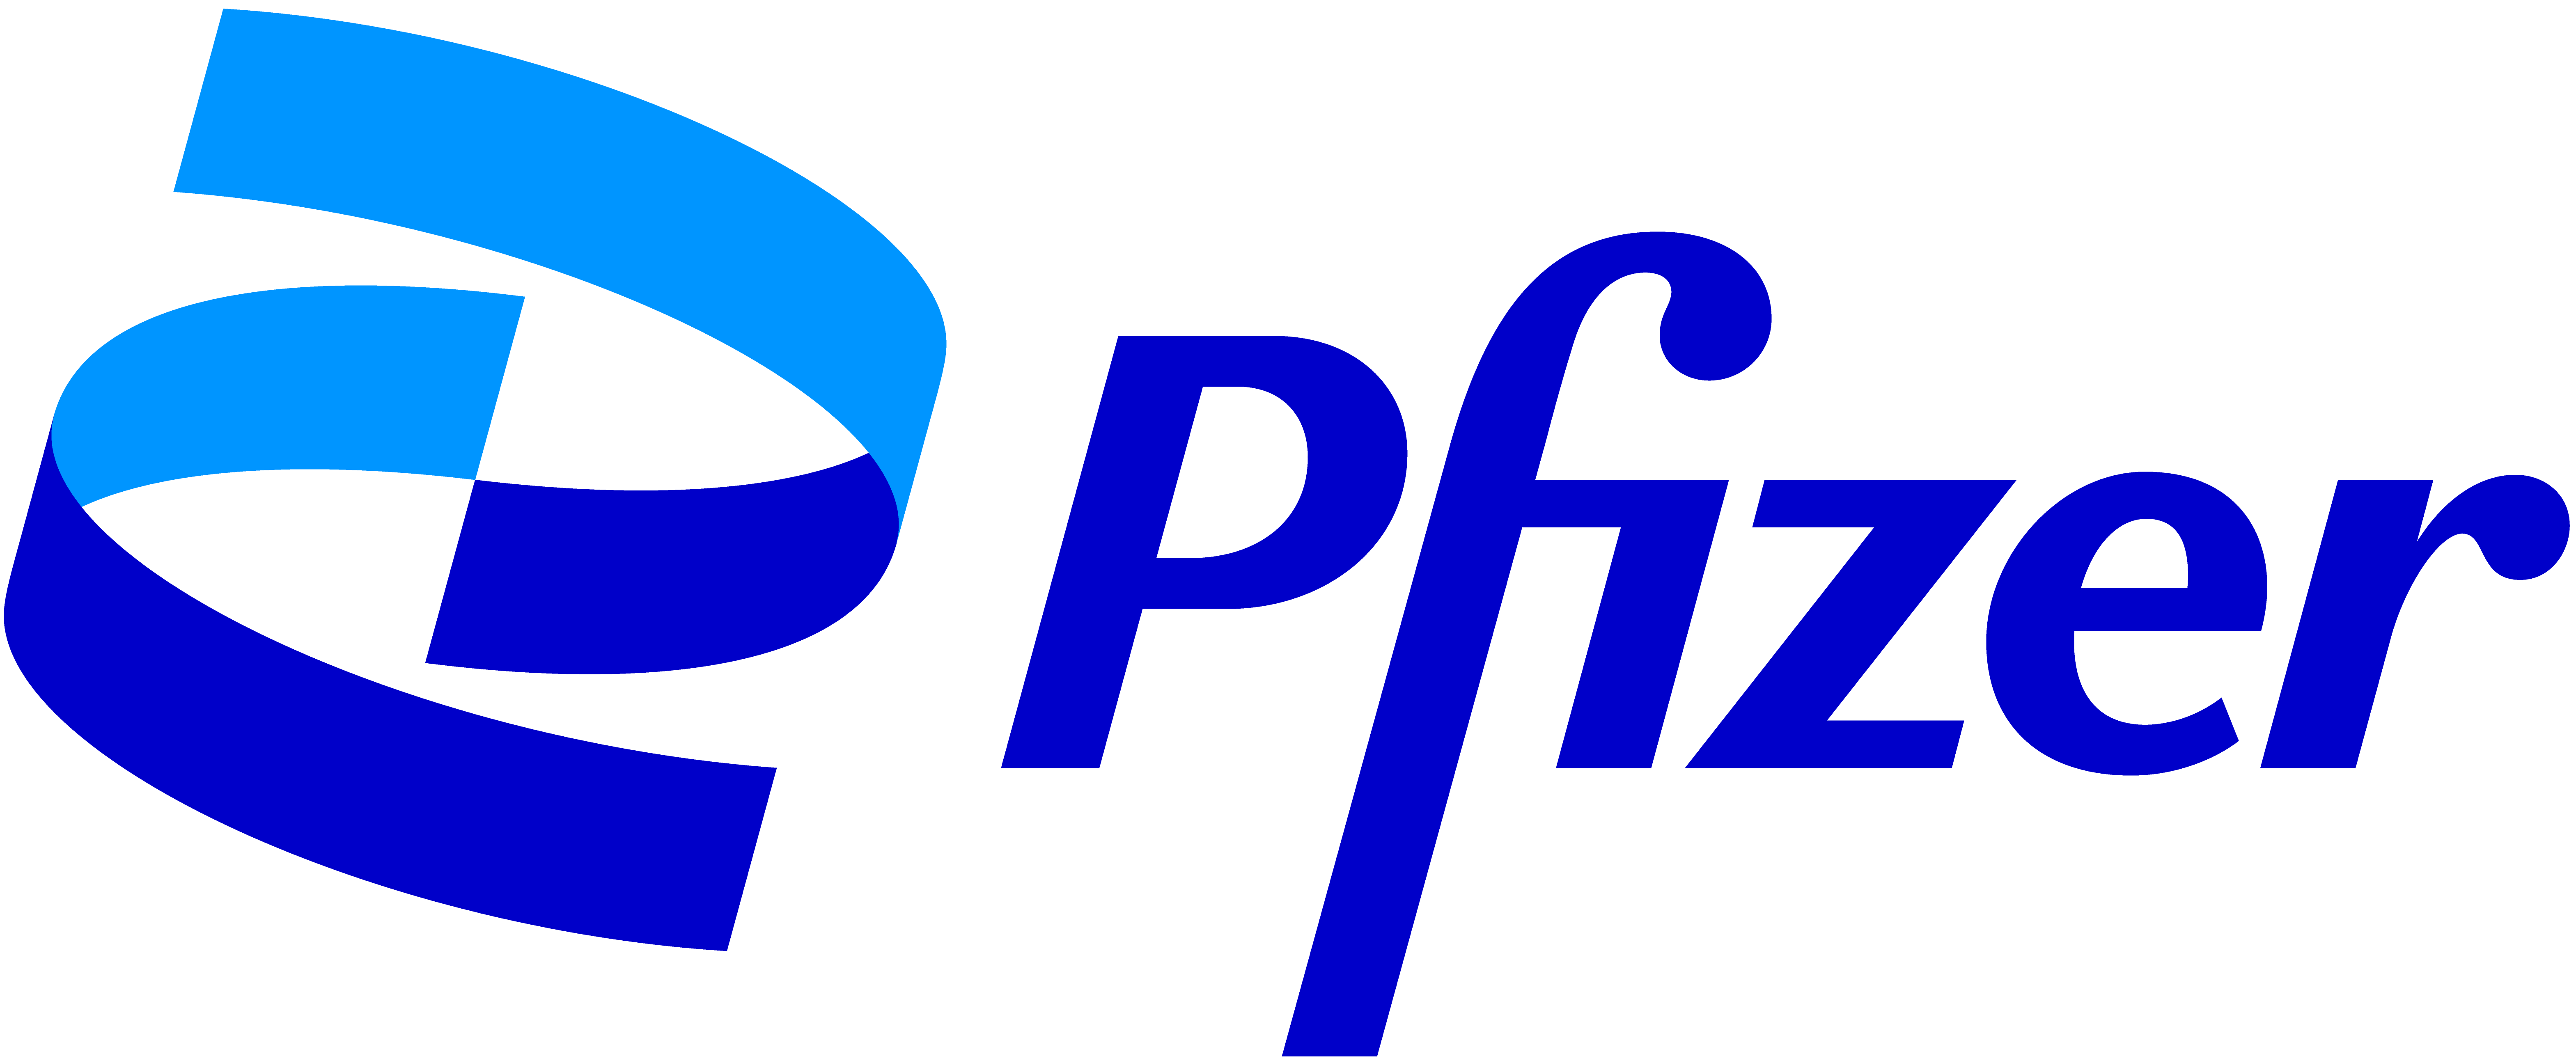 Pfizer logo featuring a blue double helix design above the brand name in capitalized blue letters on a black background.